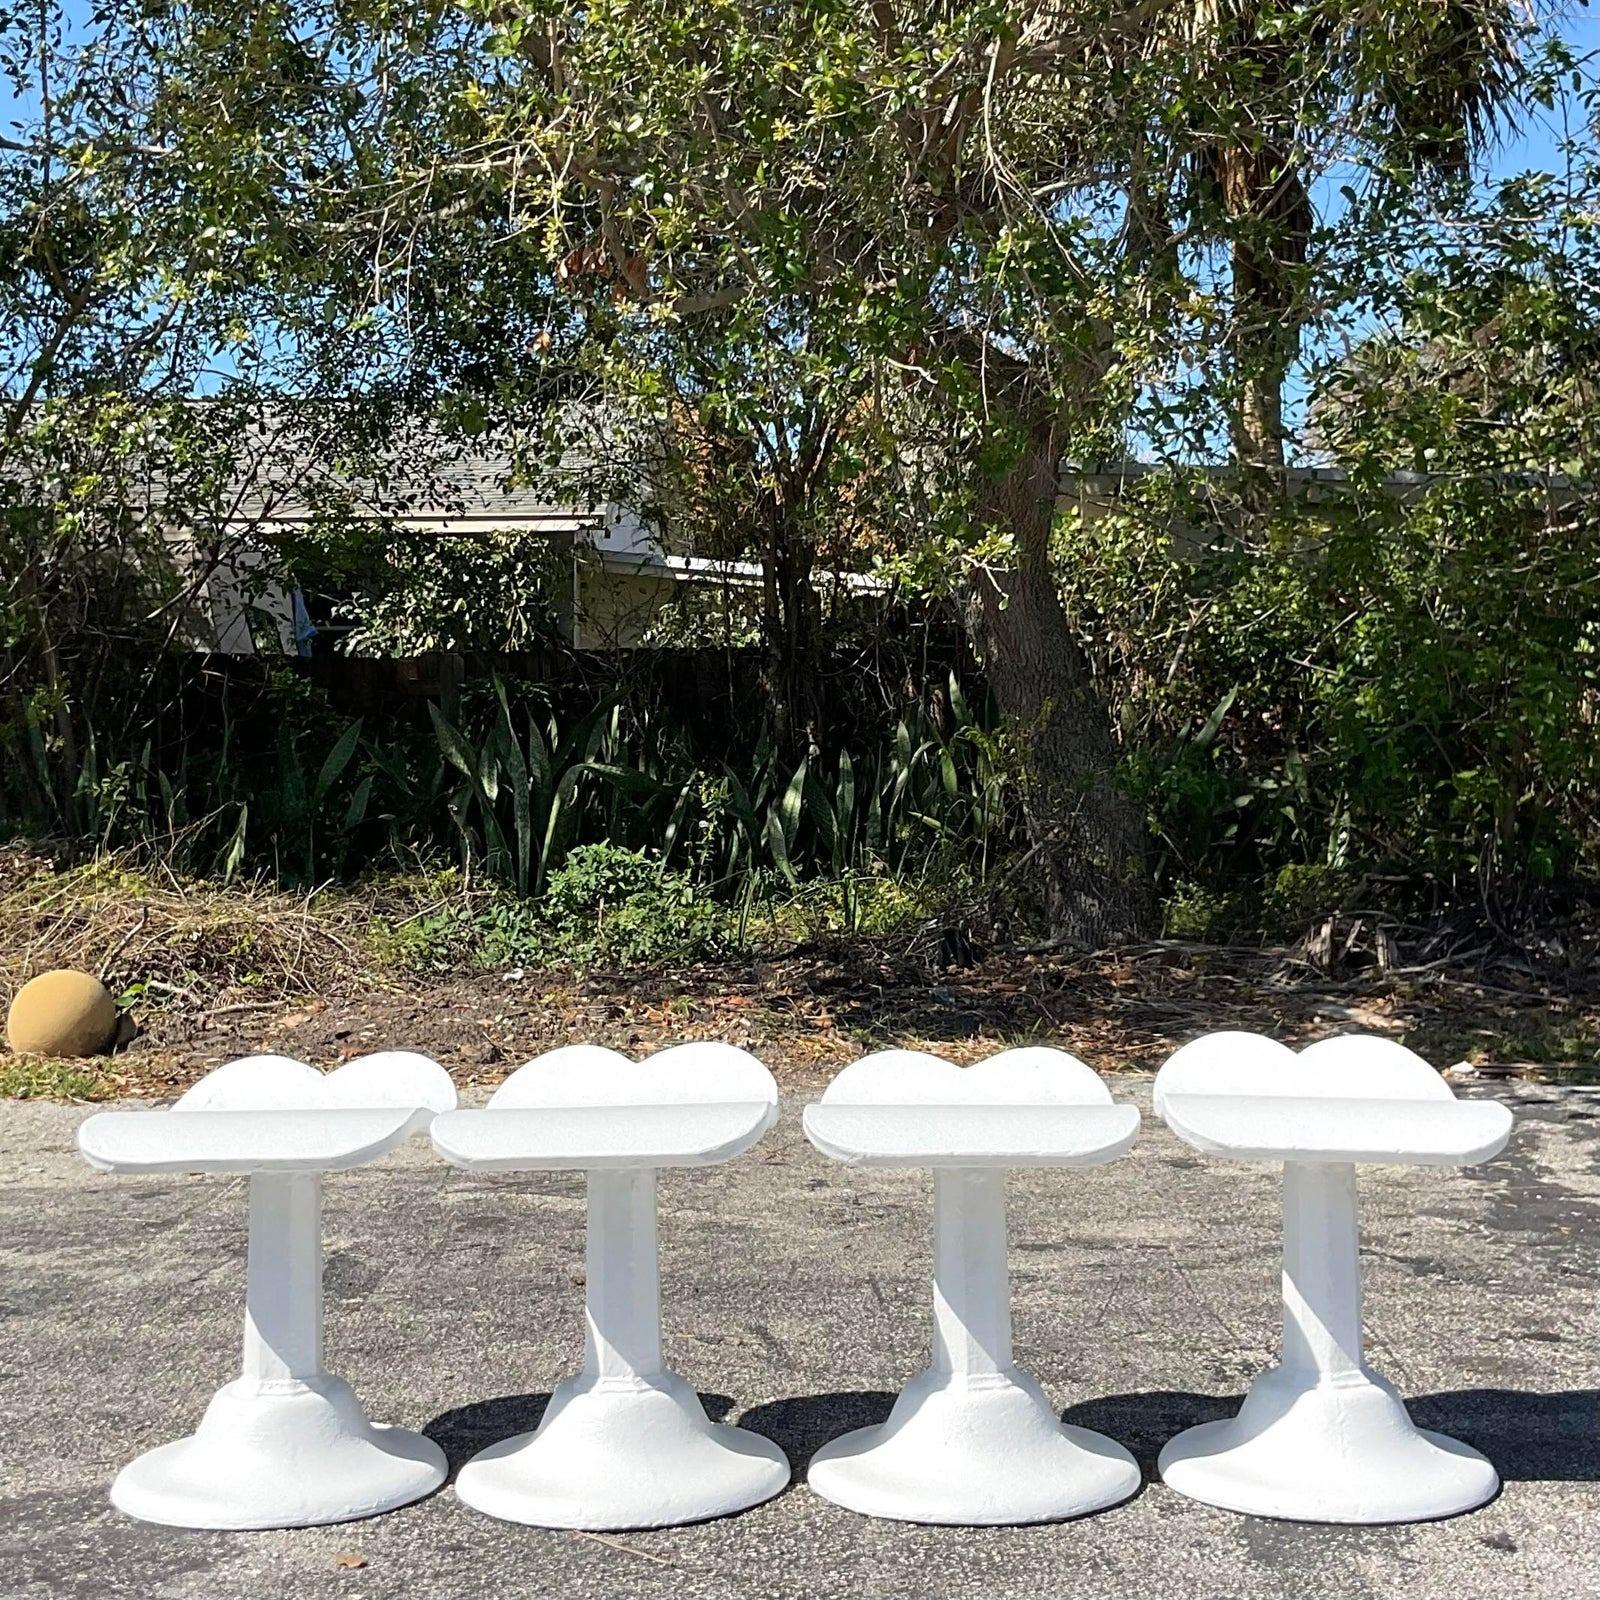 A fabulous set of four vintage low stools. Done in the manner of Dorothy Draper. Chic cast concrete in a bright white finish. Acquired from a palm Beach estate.

Seat height 17.5